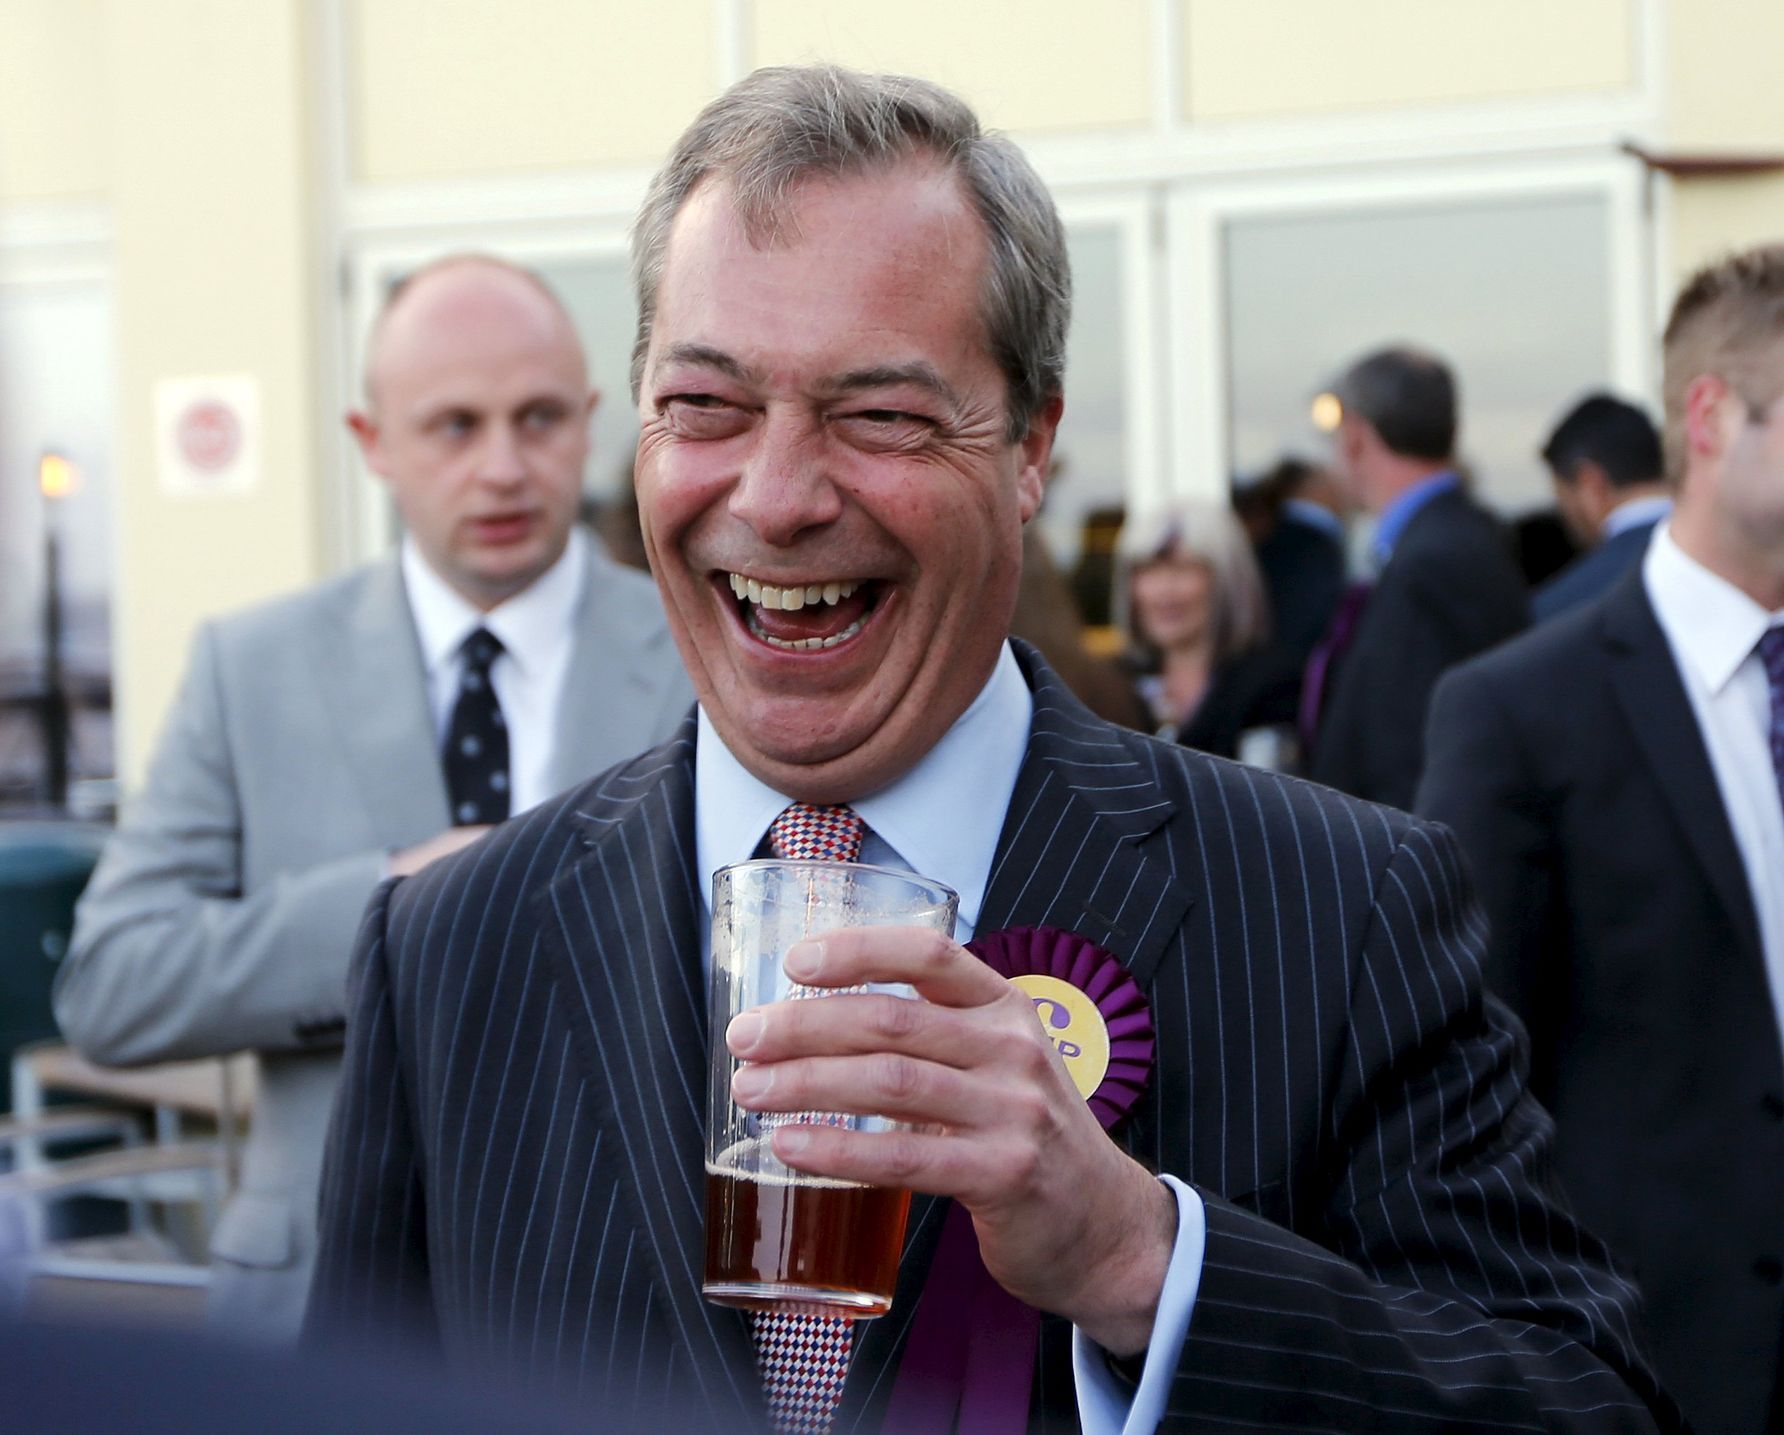 Leader of the United Kingdom Independence Party Nigel Farage laughs as he holds a pint of beer after arriving for a campaign event in Broadstairs